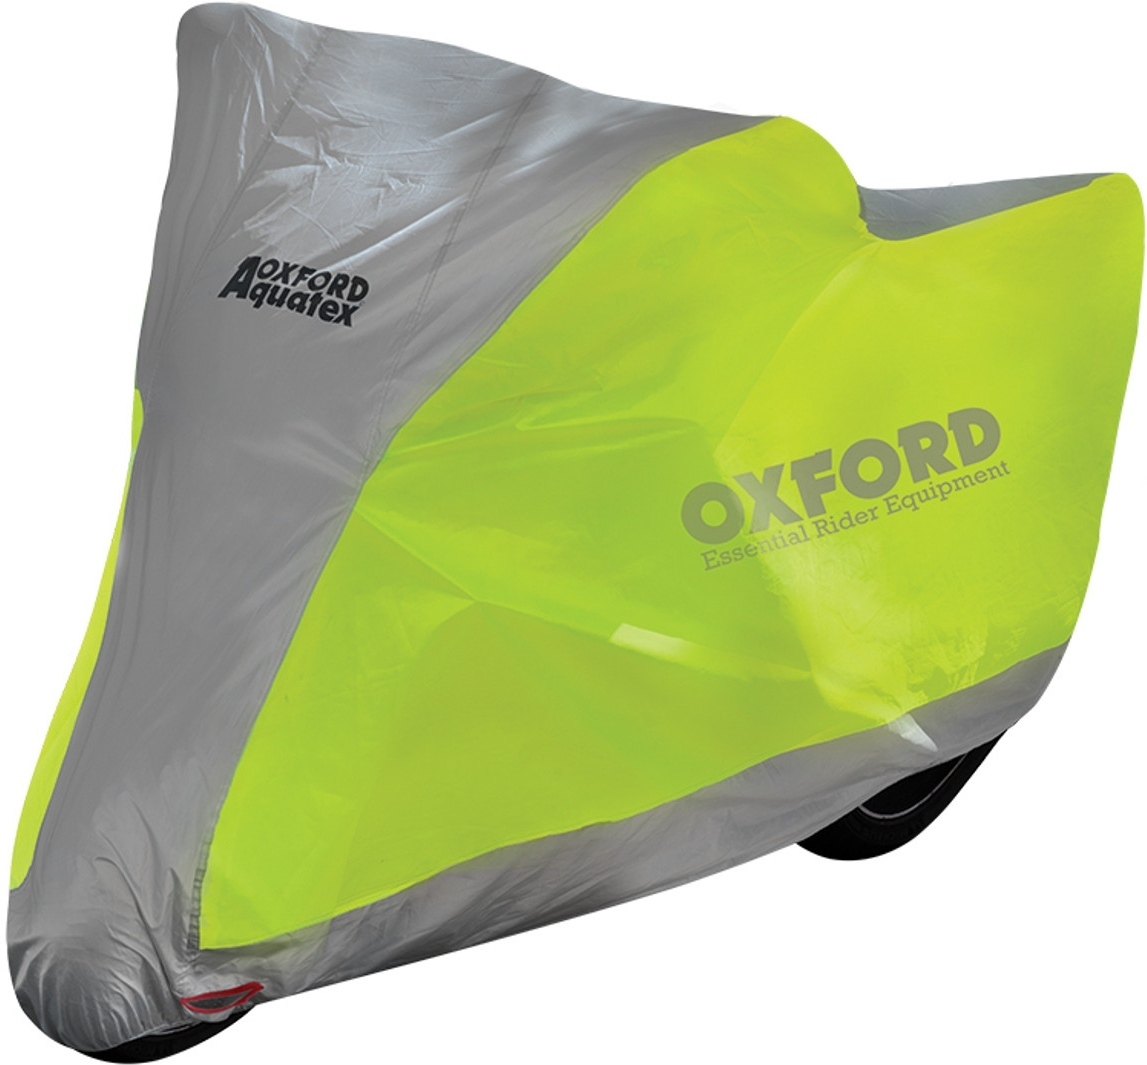 Image of Oxford Aquatex Motorcycle Cover flourescent Argent M